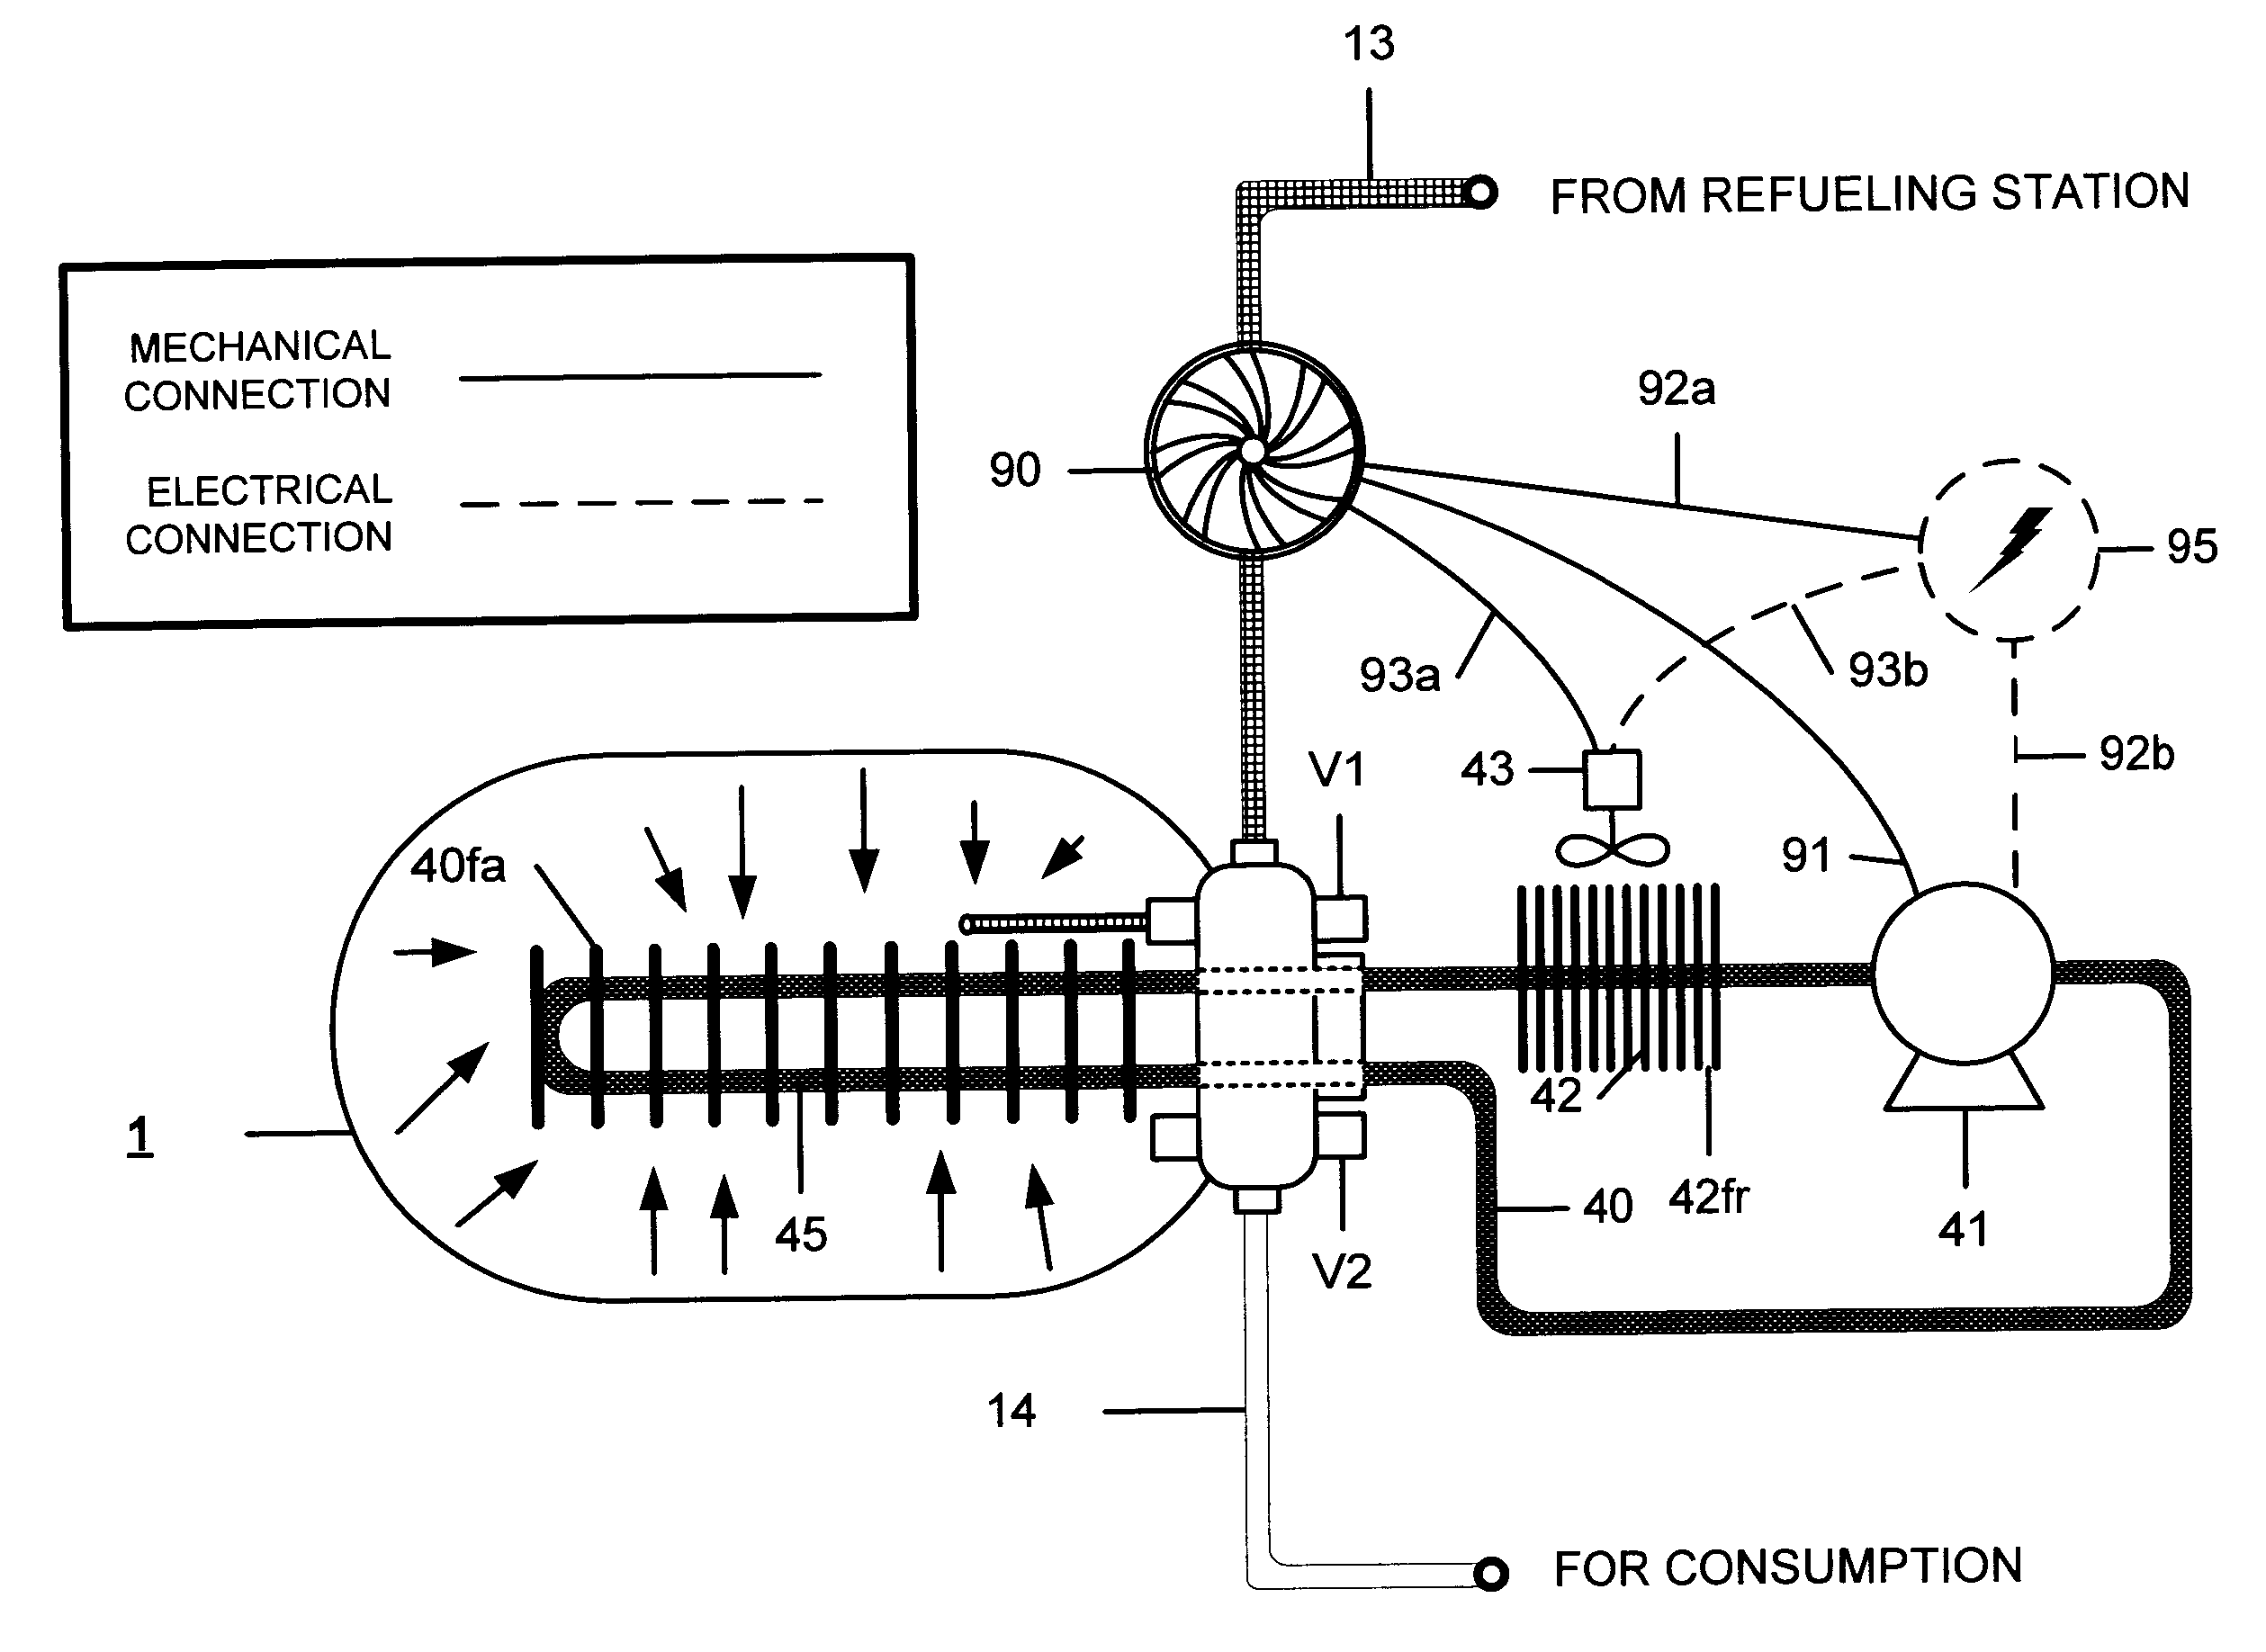 Pressure powered cooling system for enhancing the refill speed and capacity of on board high pressure vehicle gas storage tanks